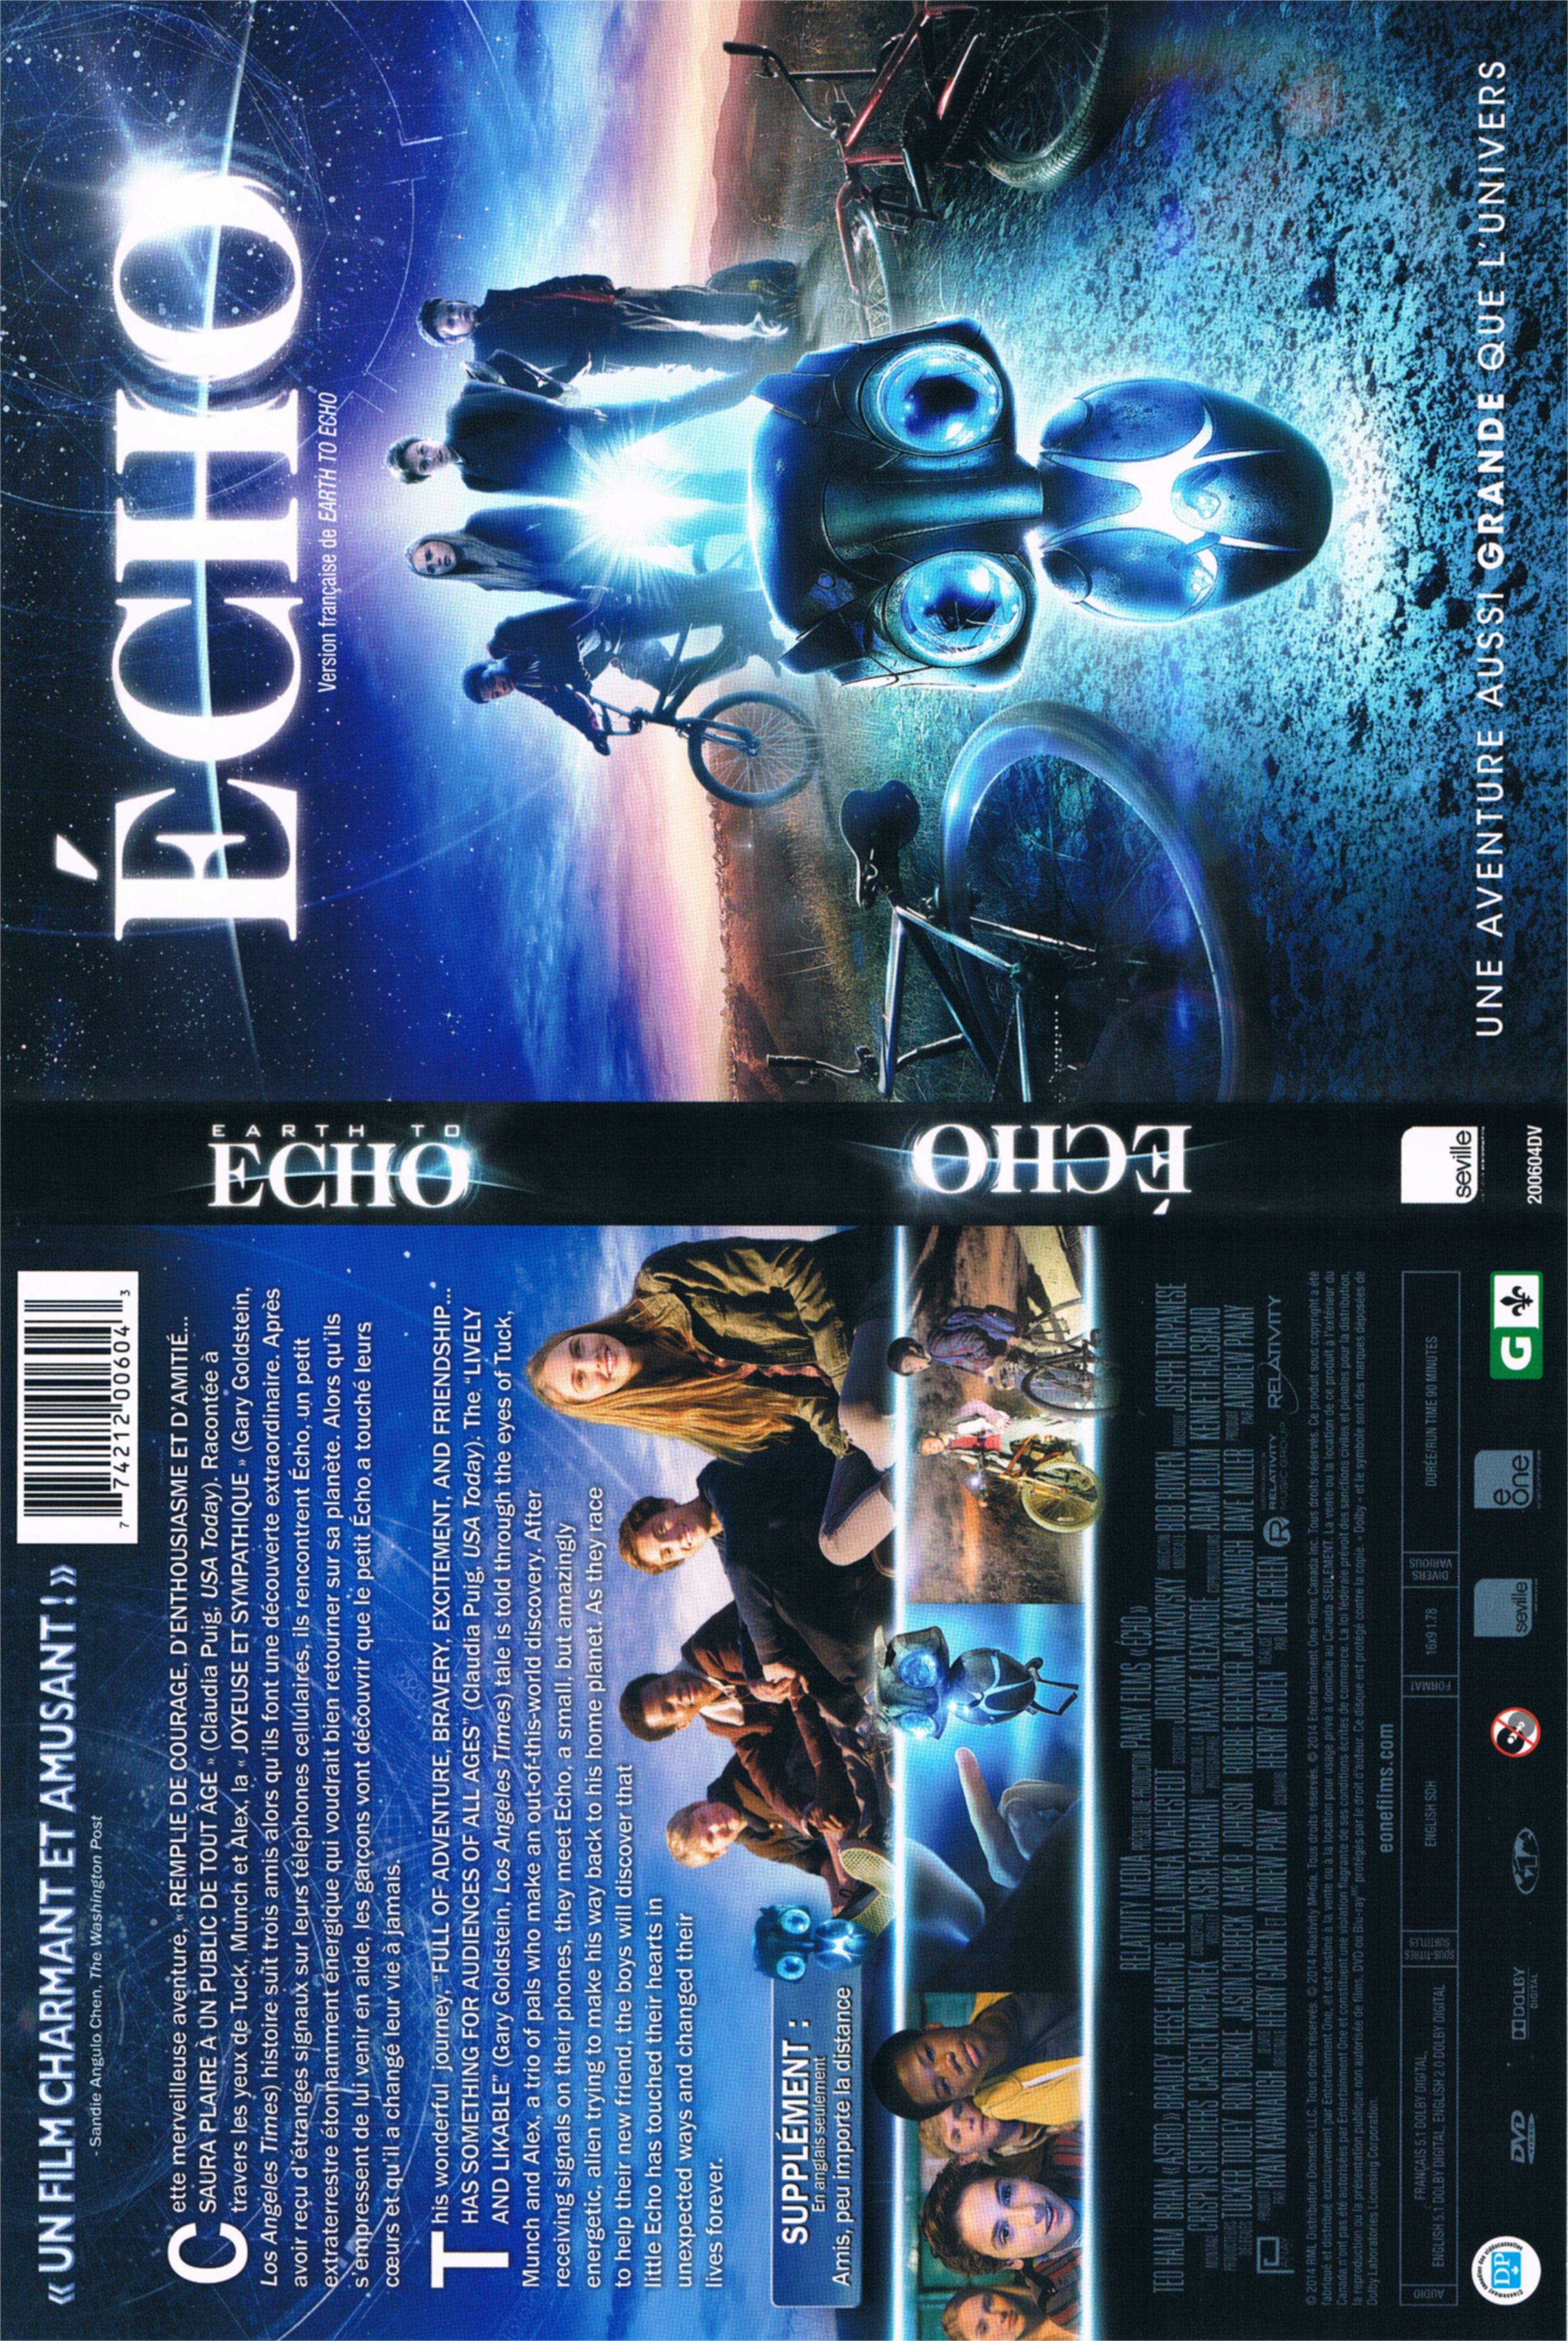 Jaquette DVD Echo (2014) - Earth to echo (Canadienne)